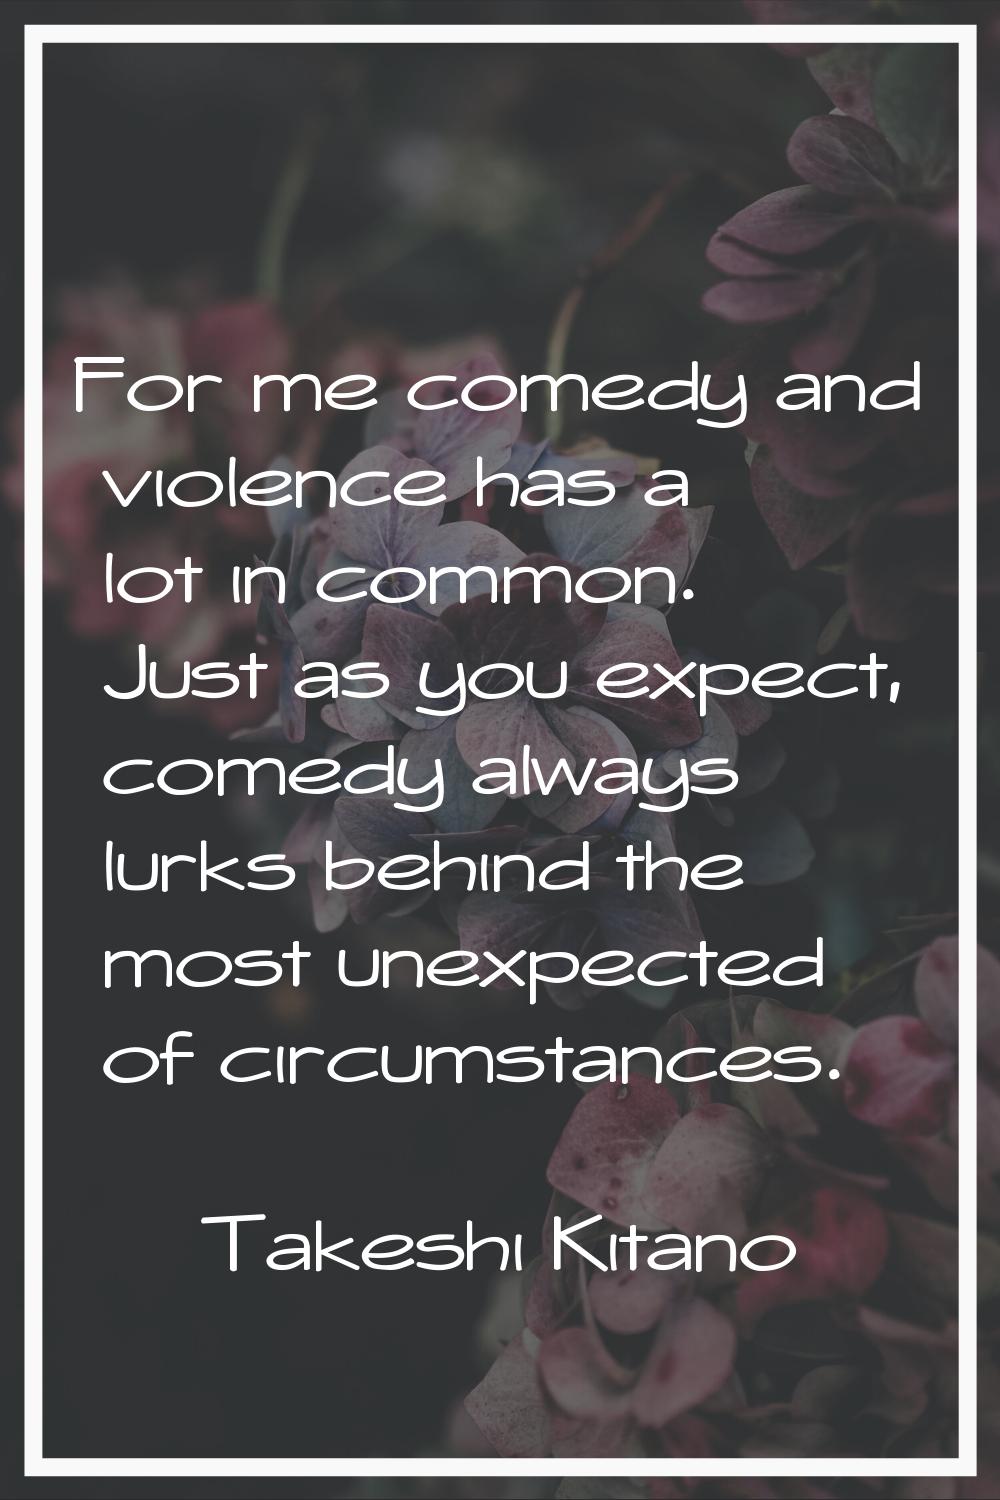 For me comedy and violence has a lot in common. Just as you expect, comedy always lurks behind the 